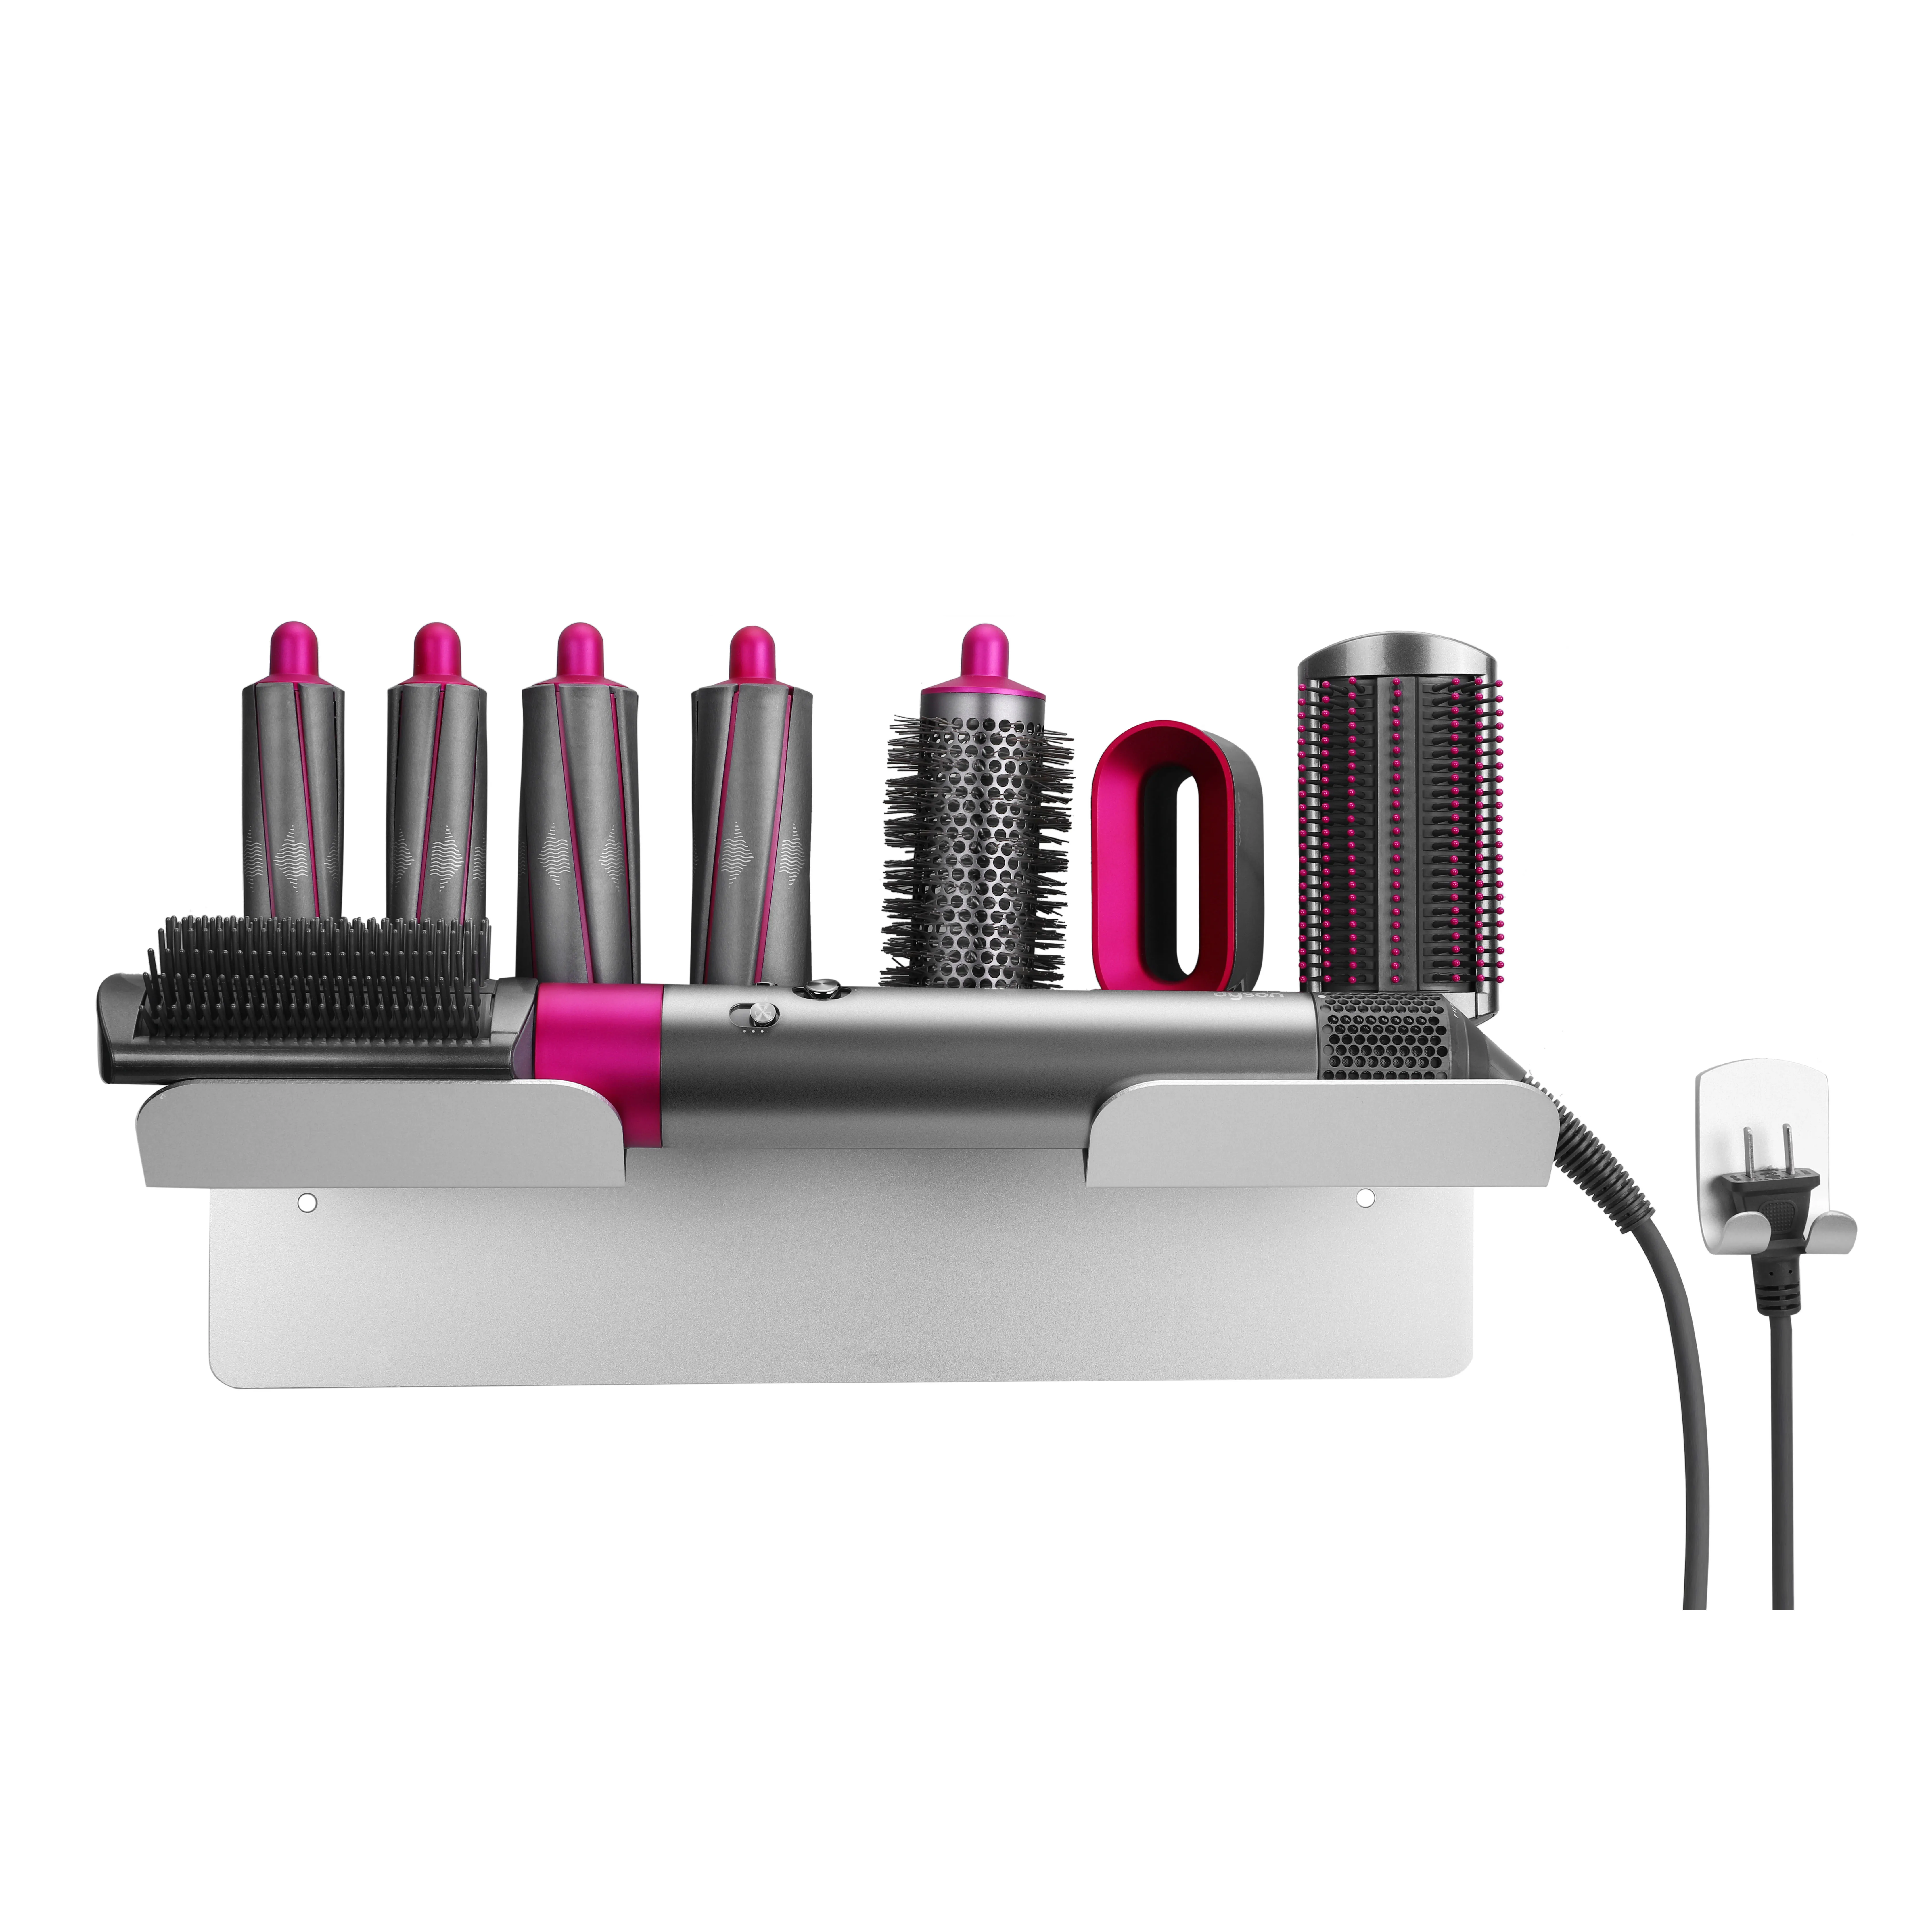 

Wall Mount Holder for Dyson Airwrap Styler, for Dyson Hair crul wand Storage Rack for Curling Iron Wand Barrels Brushes